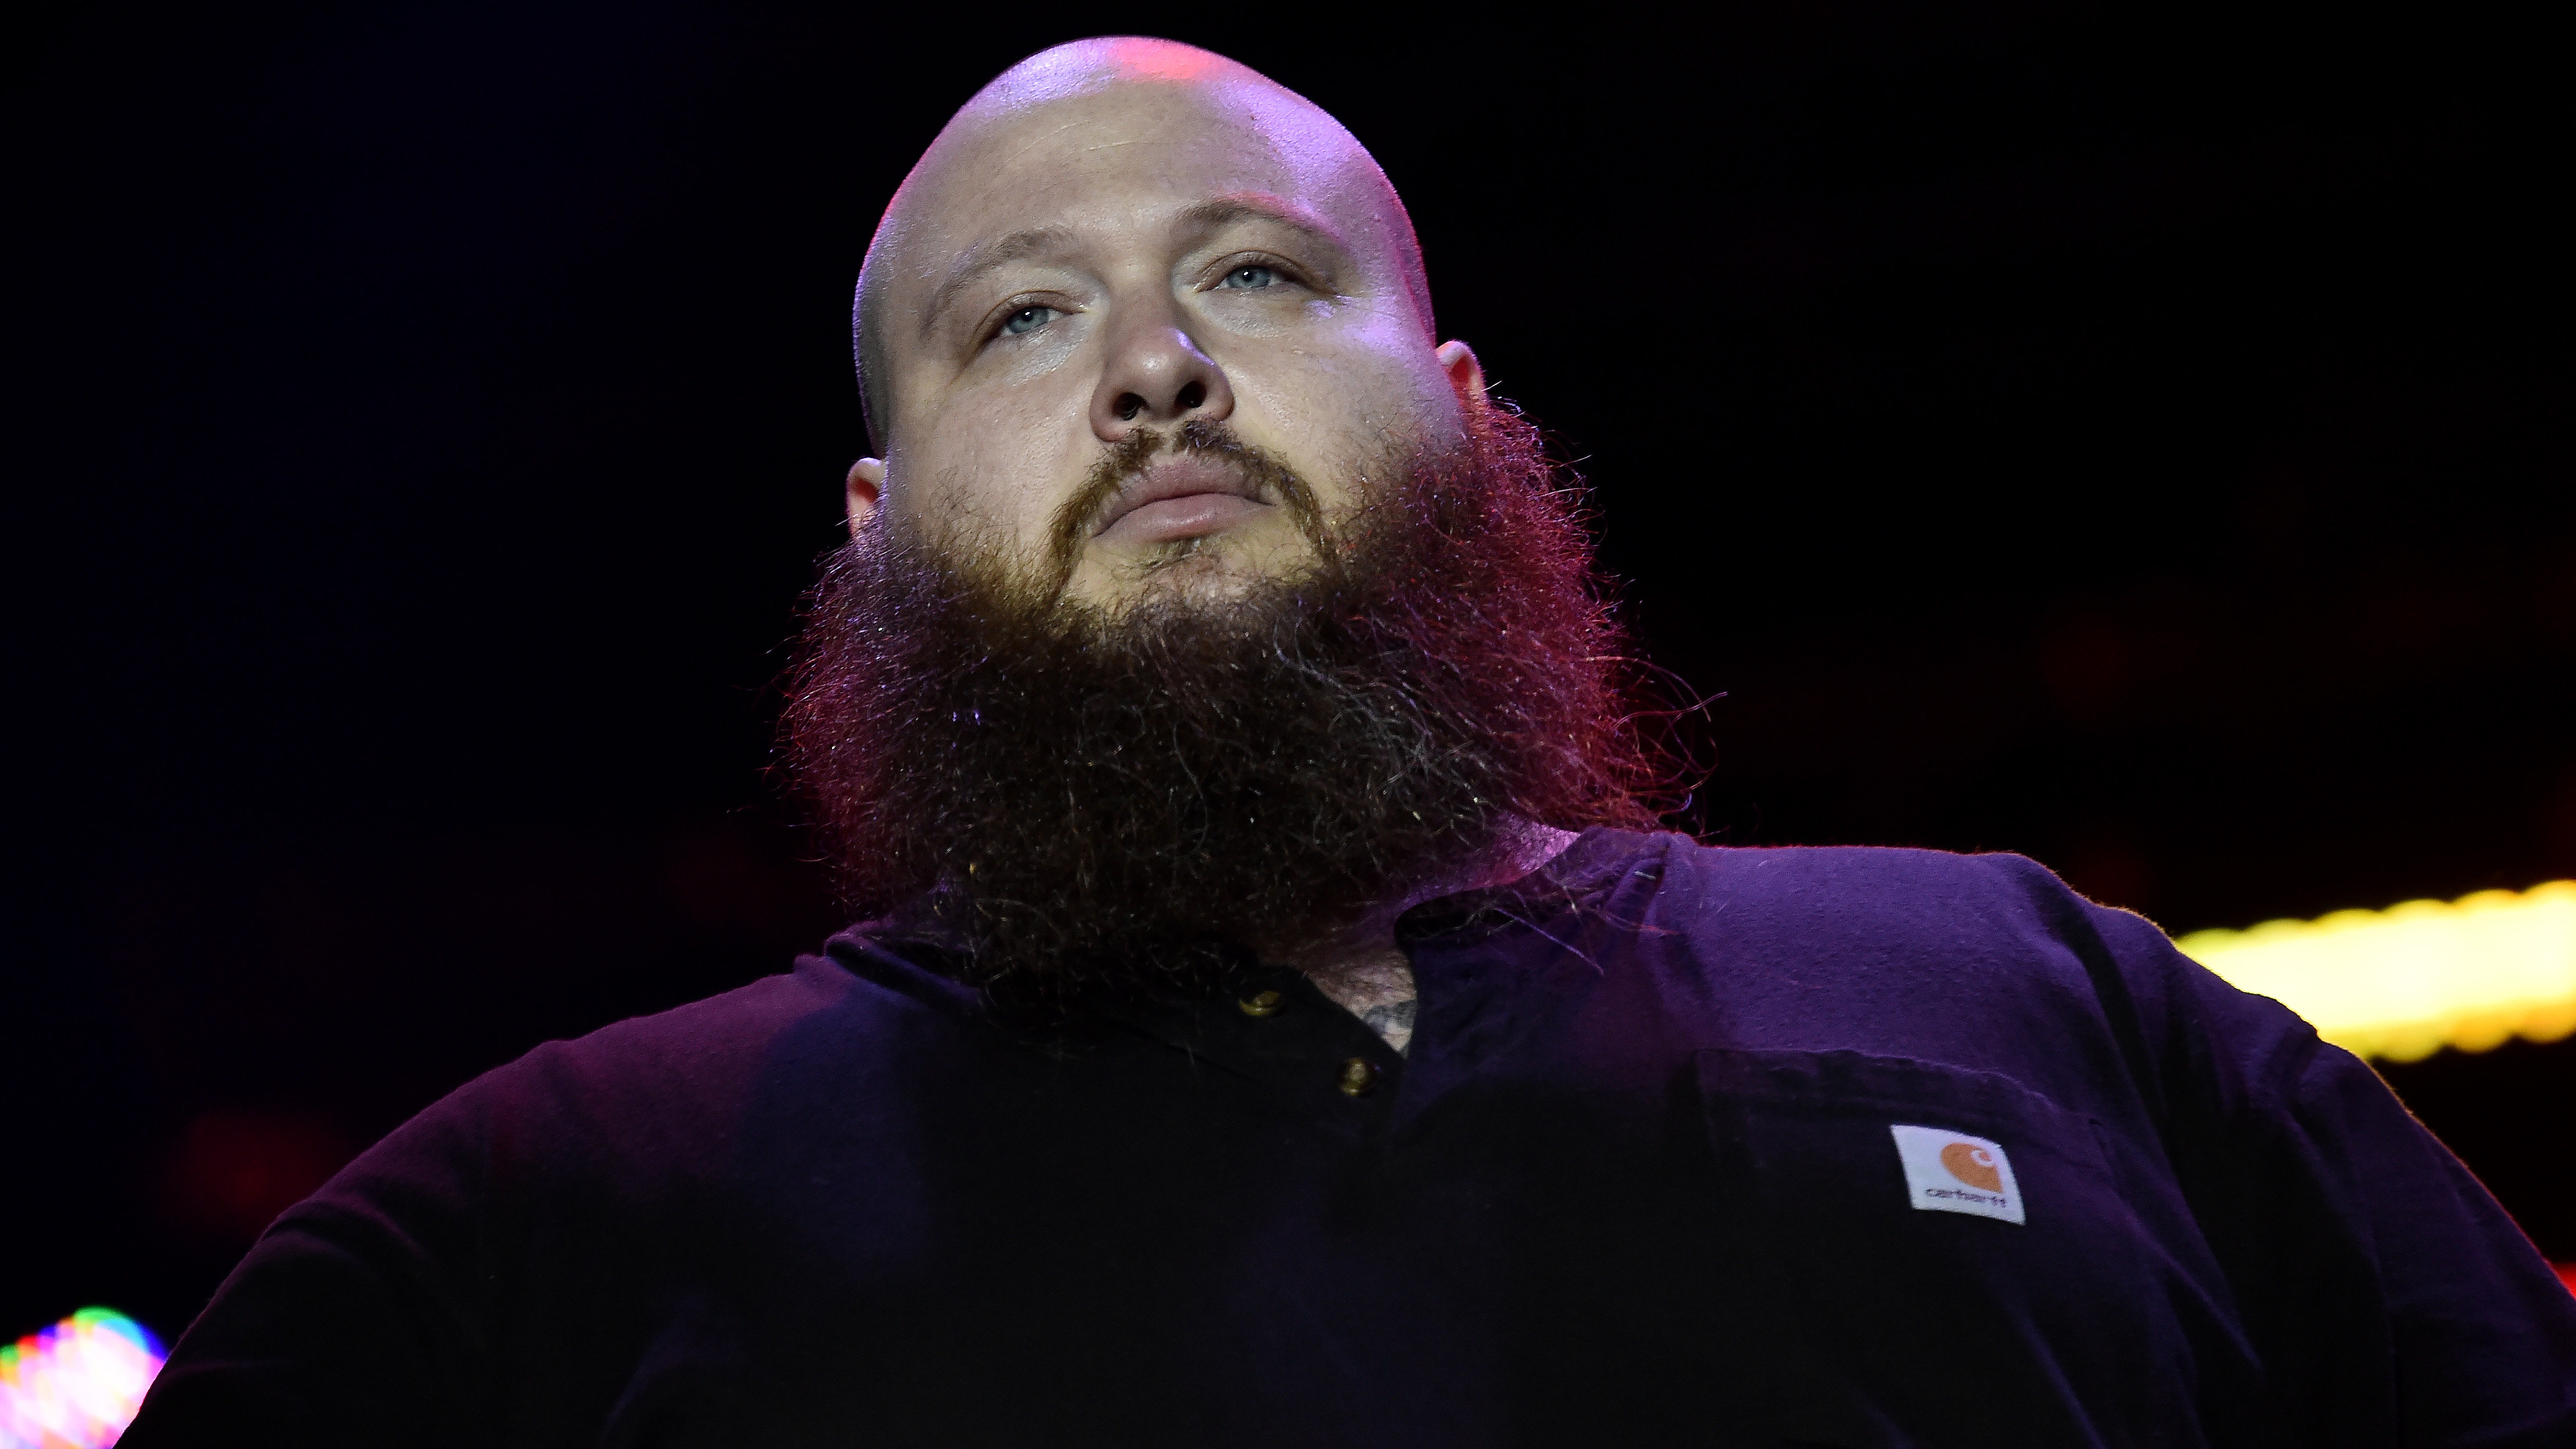 Action Bronson performs live during Rolling Loud music festival